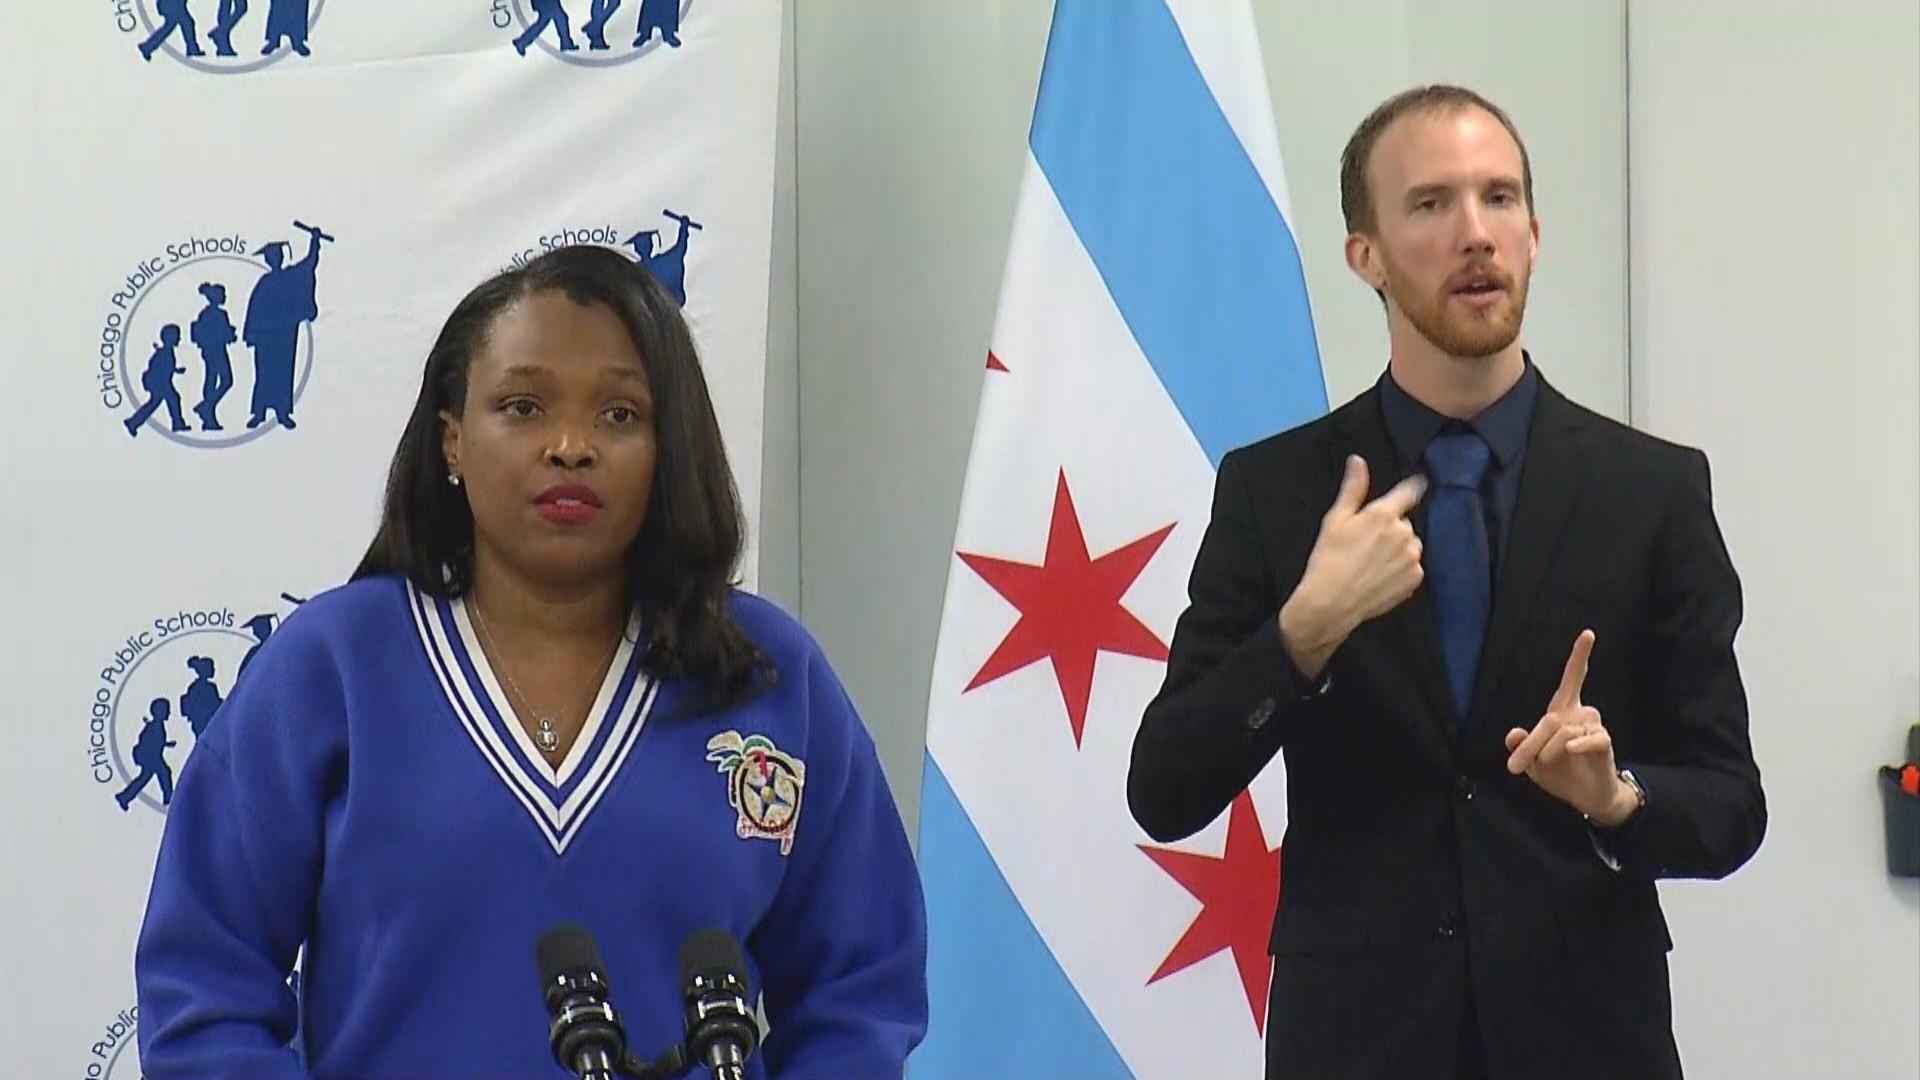 CPS CEO Janice Jackson speaks at a news conference Tuesday, Jan. 26, 2021 amid negotiations between the district and Chicago Public Schools. (WTTW News)